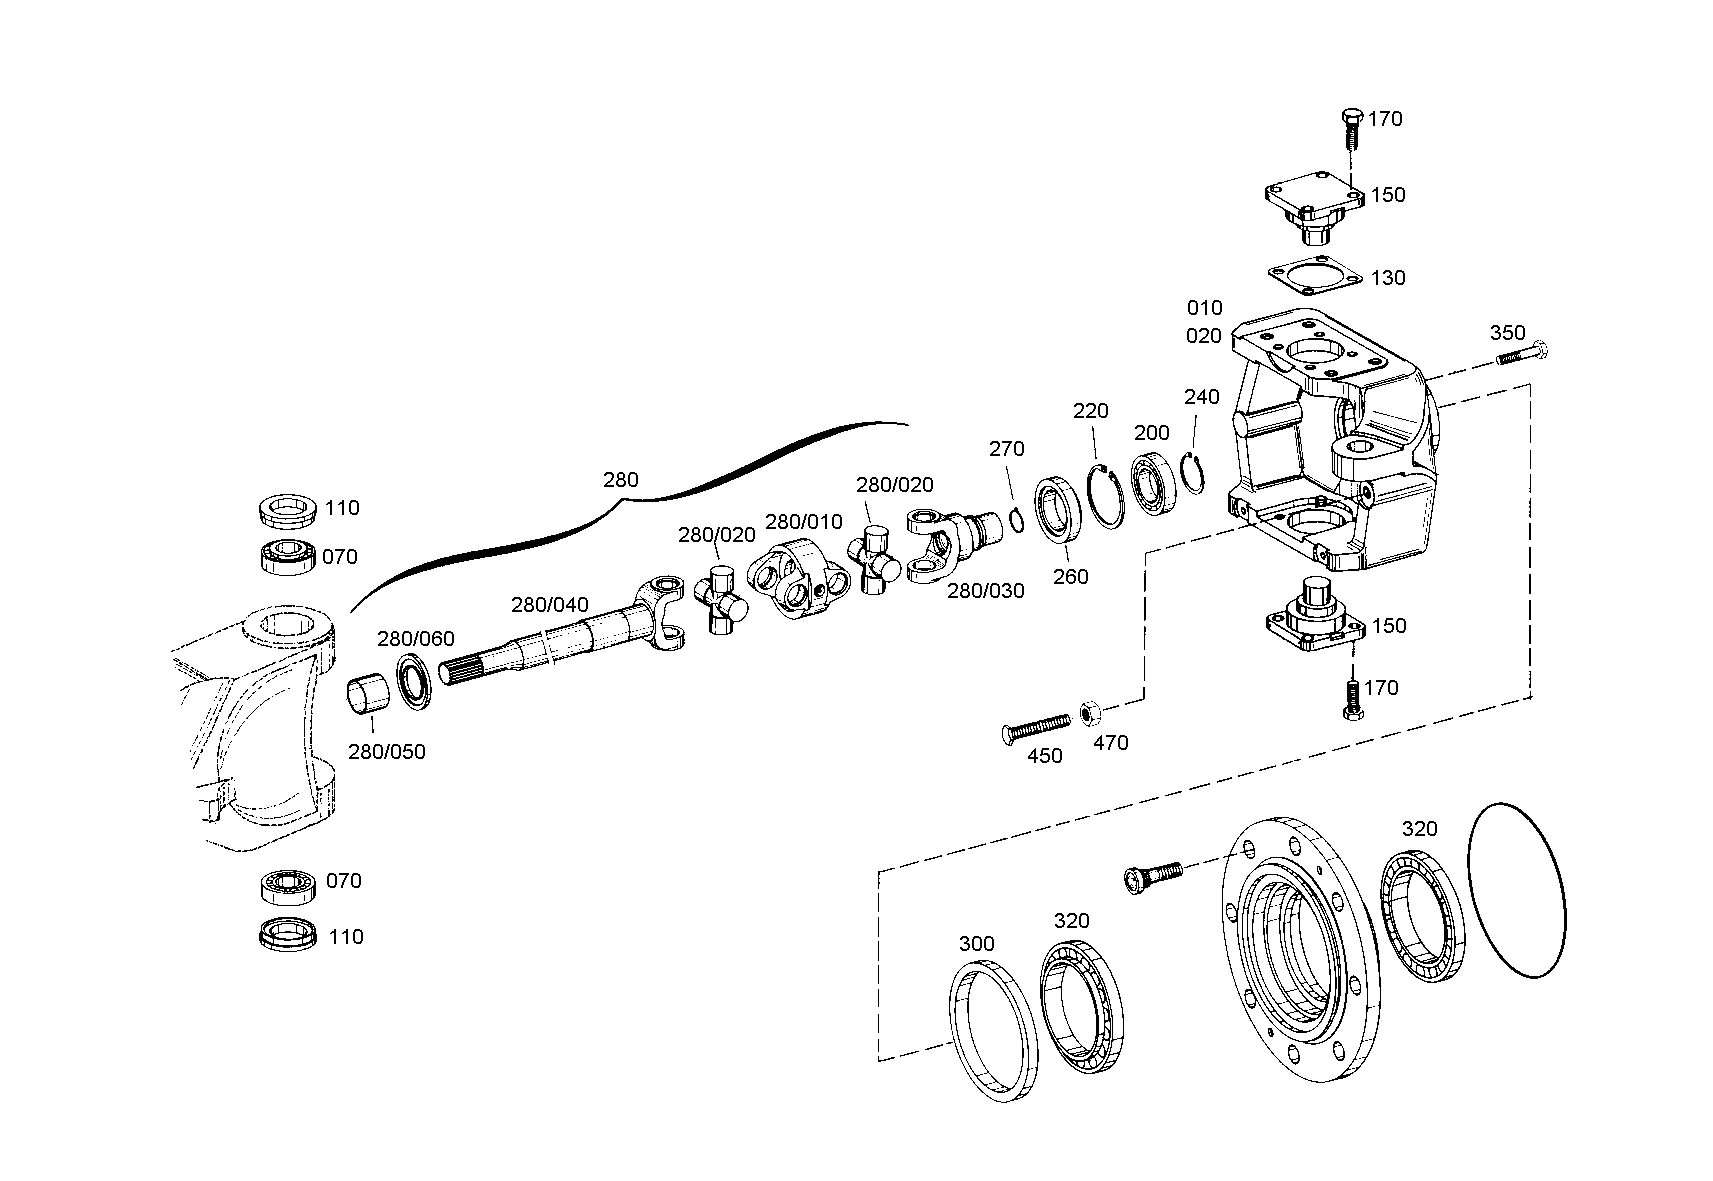 drawing for AGCO F308300021090 - FORK HEAD (figure 3)